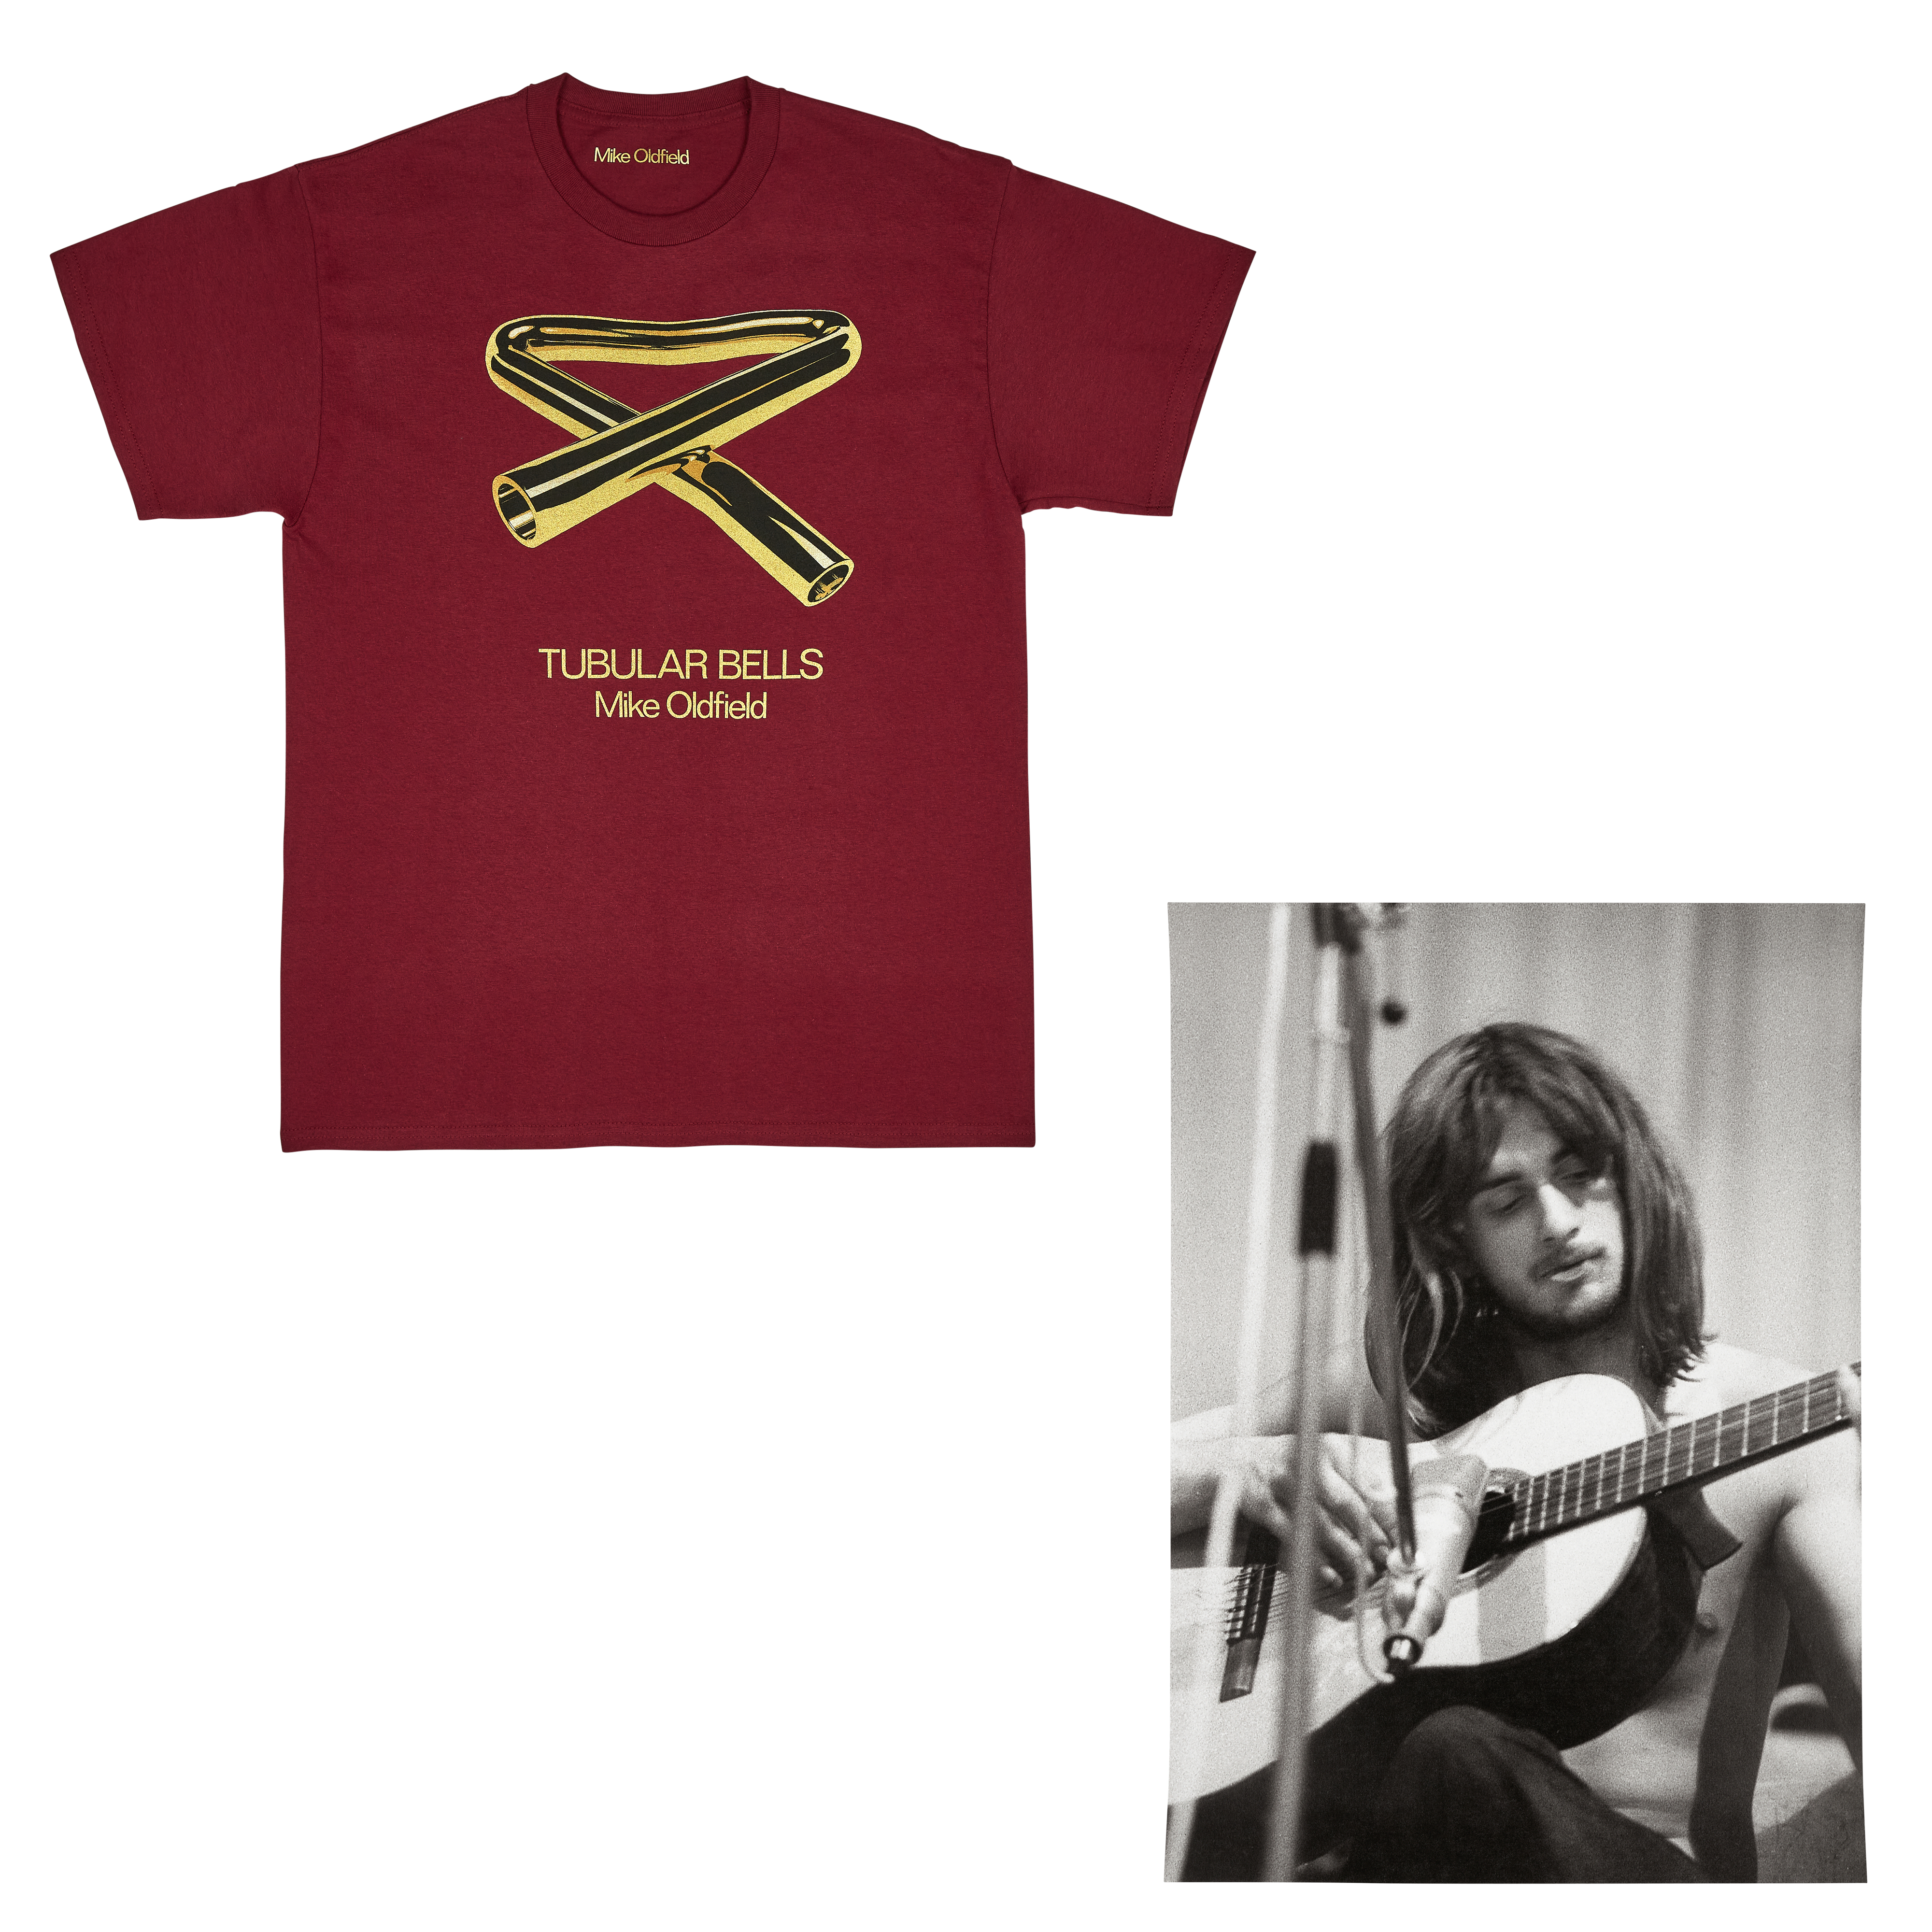 Official Hand Numbered Limited Edition A2 Print (2/2) + Official Tubular Bells Anniversary T-shirt (Maroon)